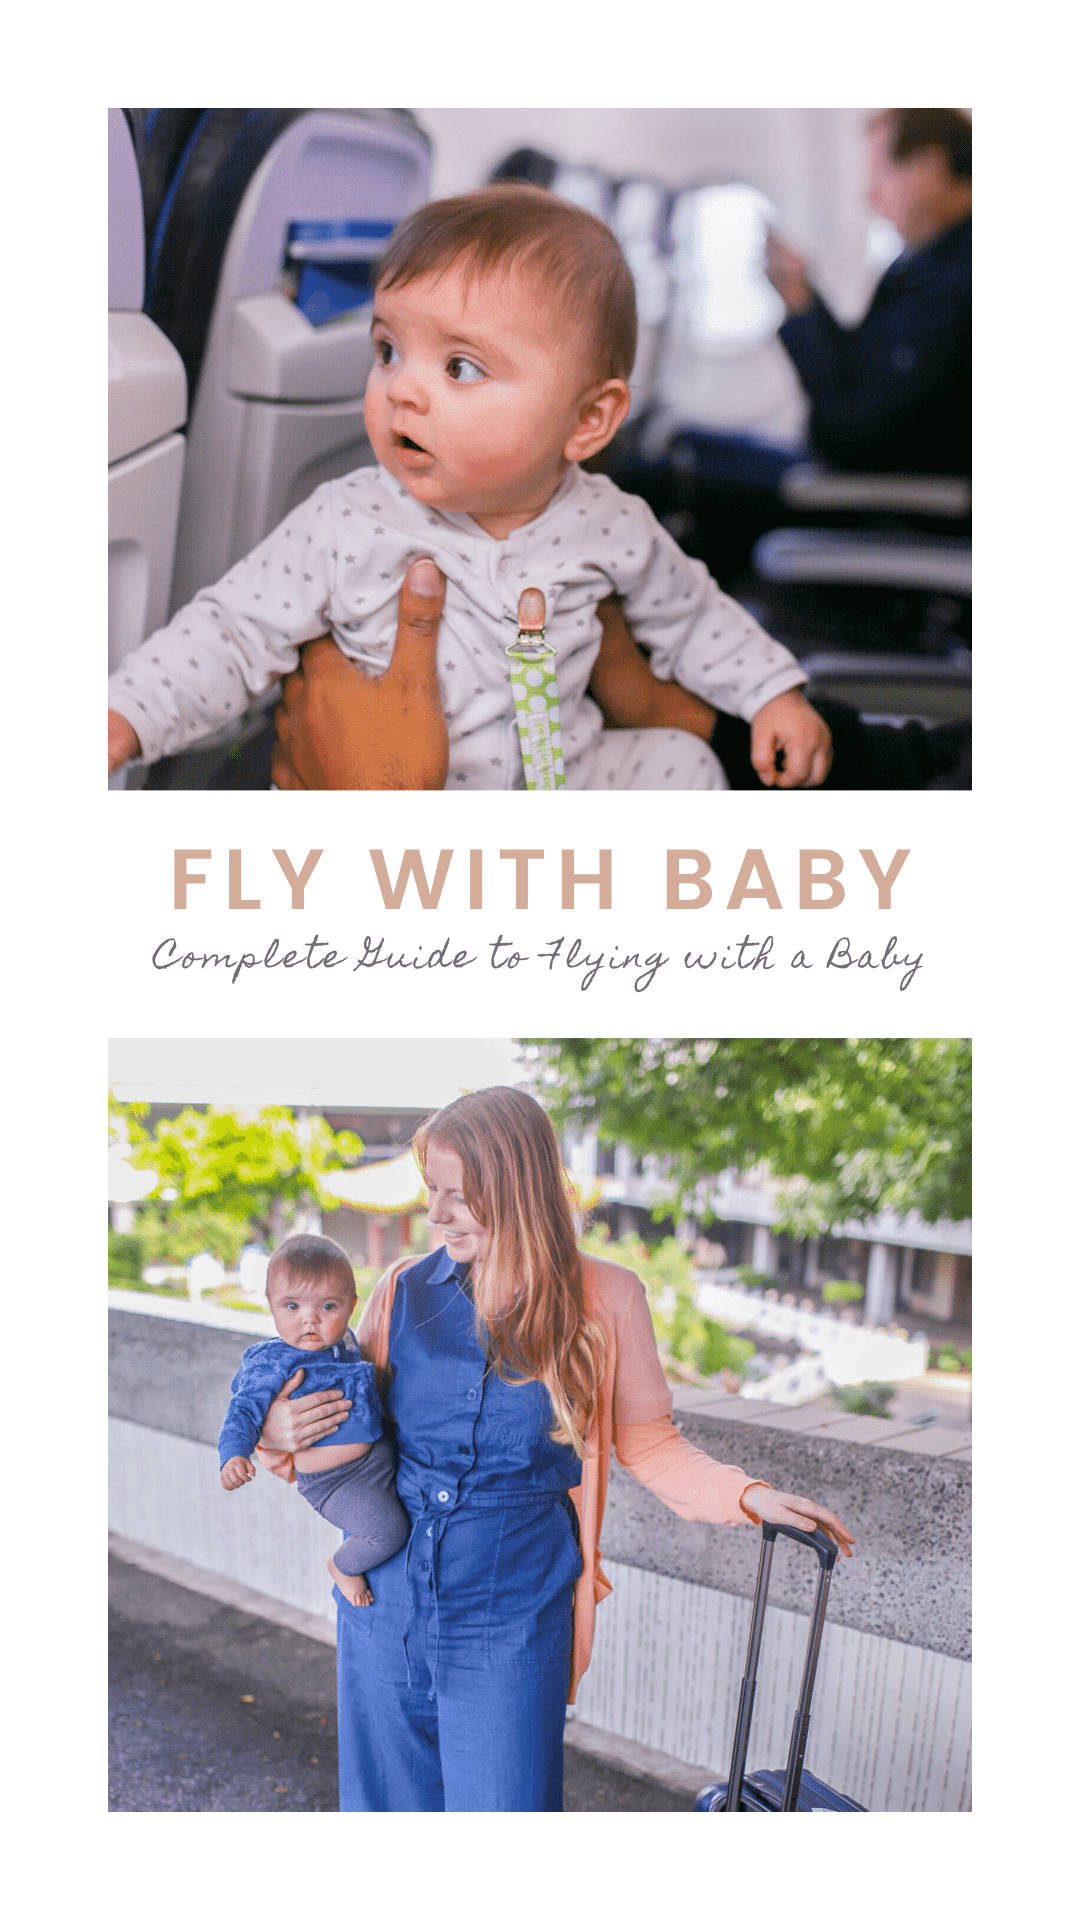 Complete Guide to Flying with a Baby